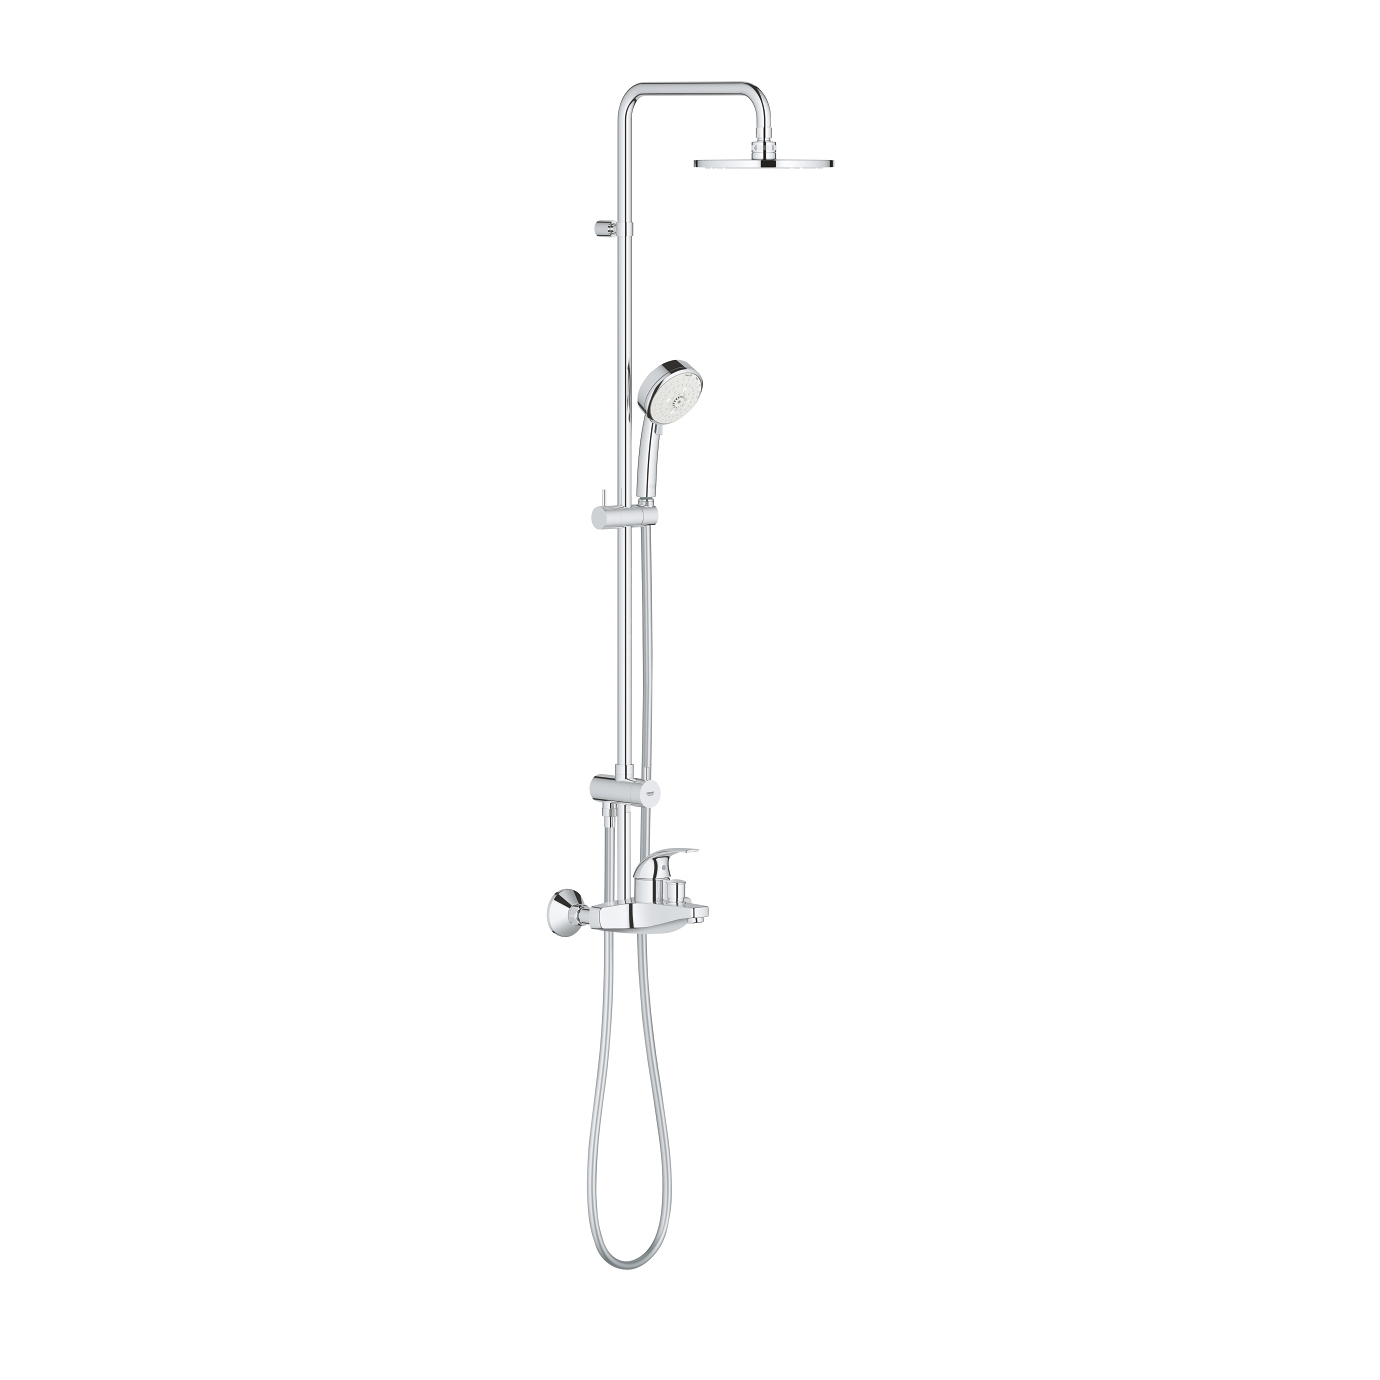 Душевая стойка Grohe New Tempesta Cosmopolitan System 26305001 душевая стойка grohe tempesta system 200 26452001